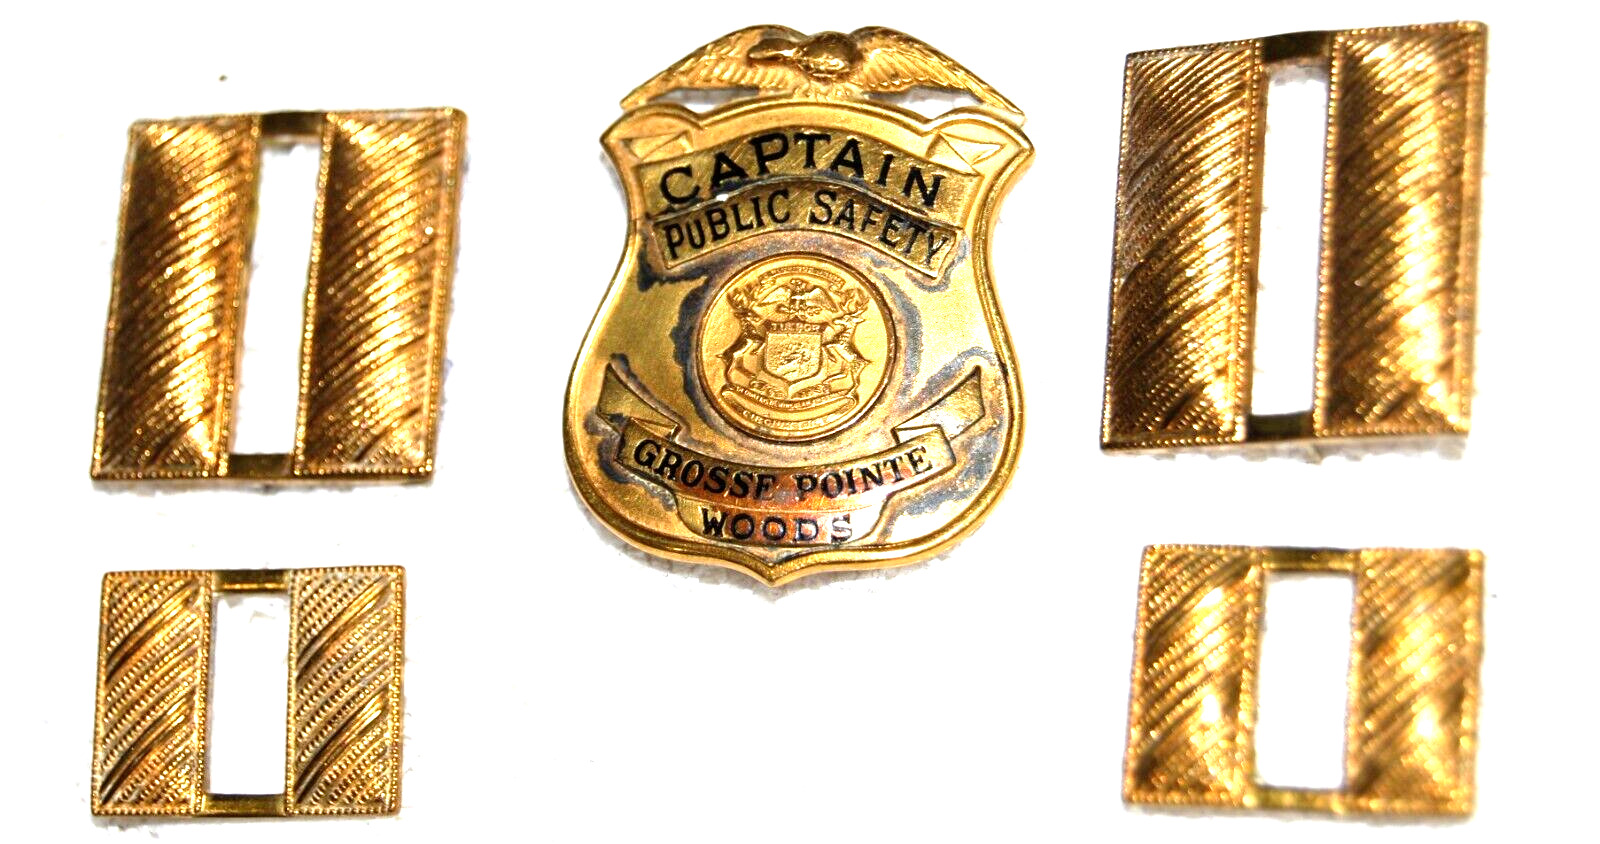 GROSSE POINT WOODS MICHIGAN Officer Obsolete Badge Shield CAPTAIN PUBLIC SAFETY